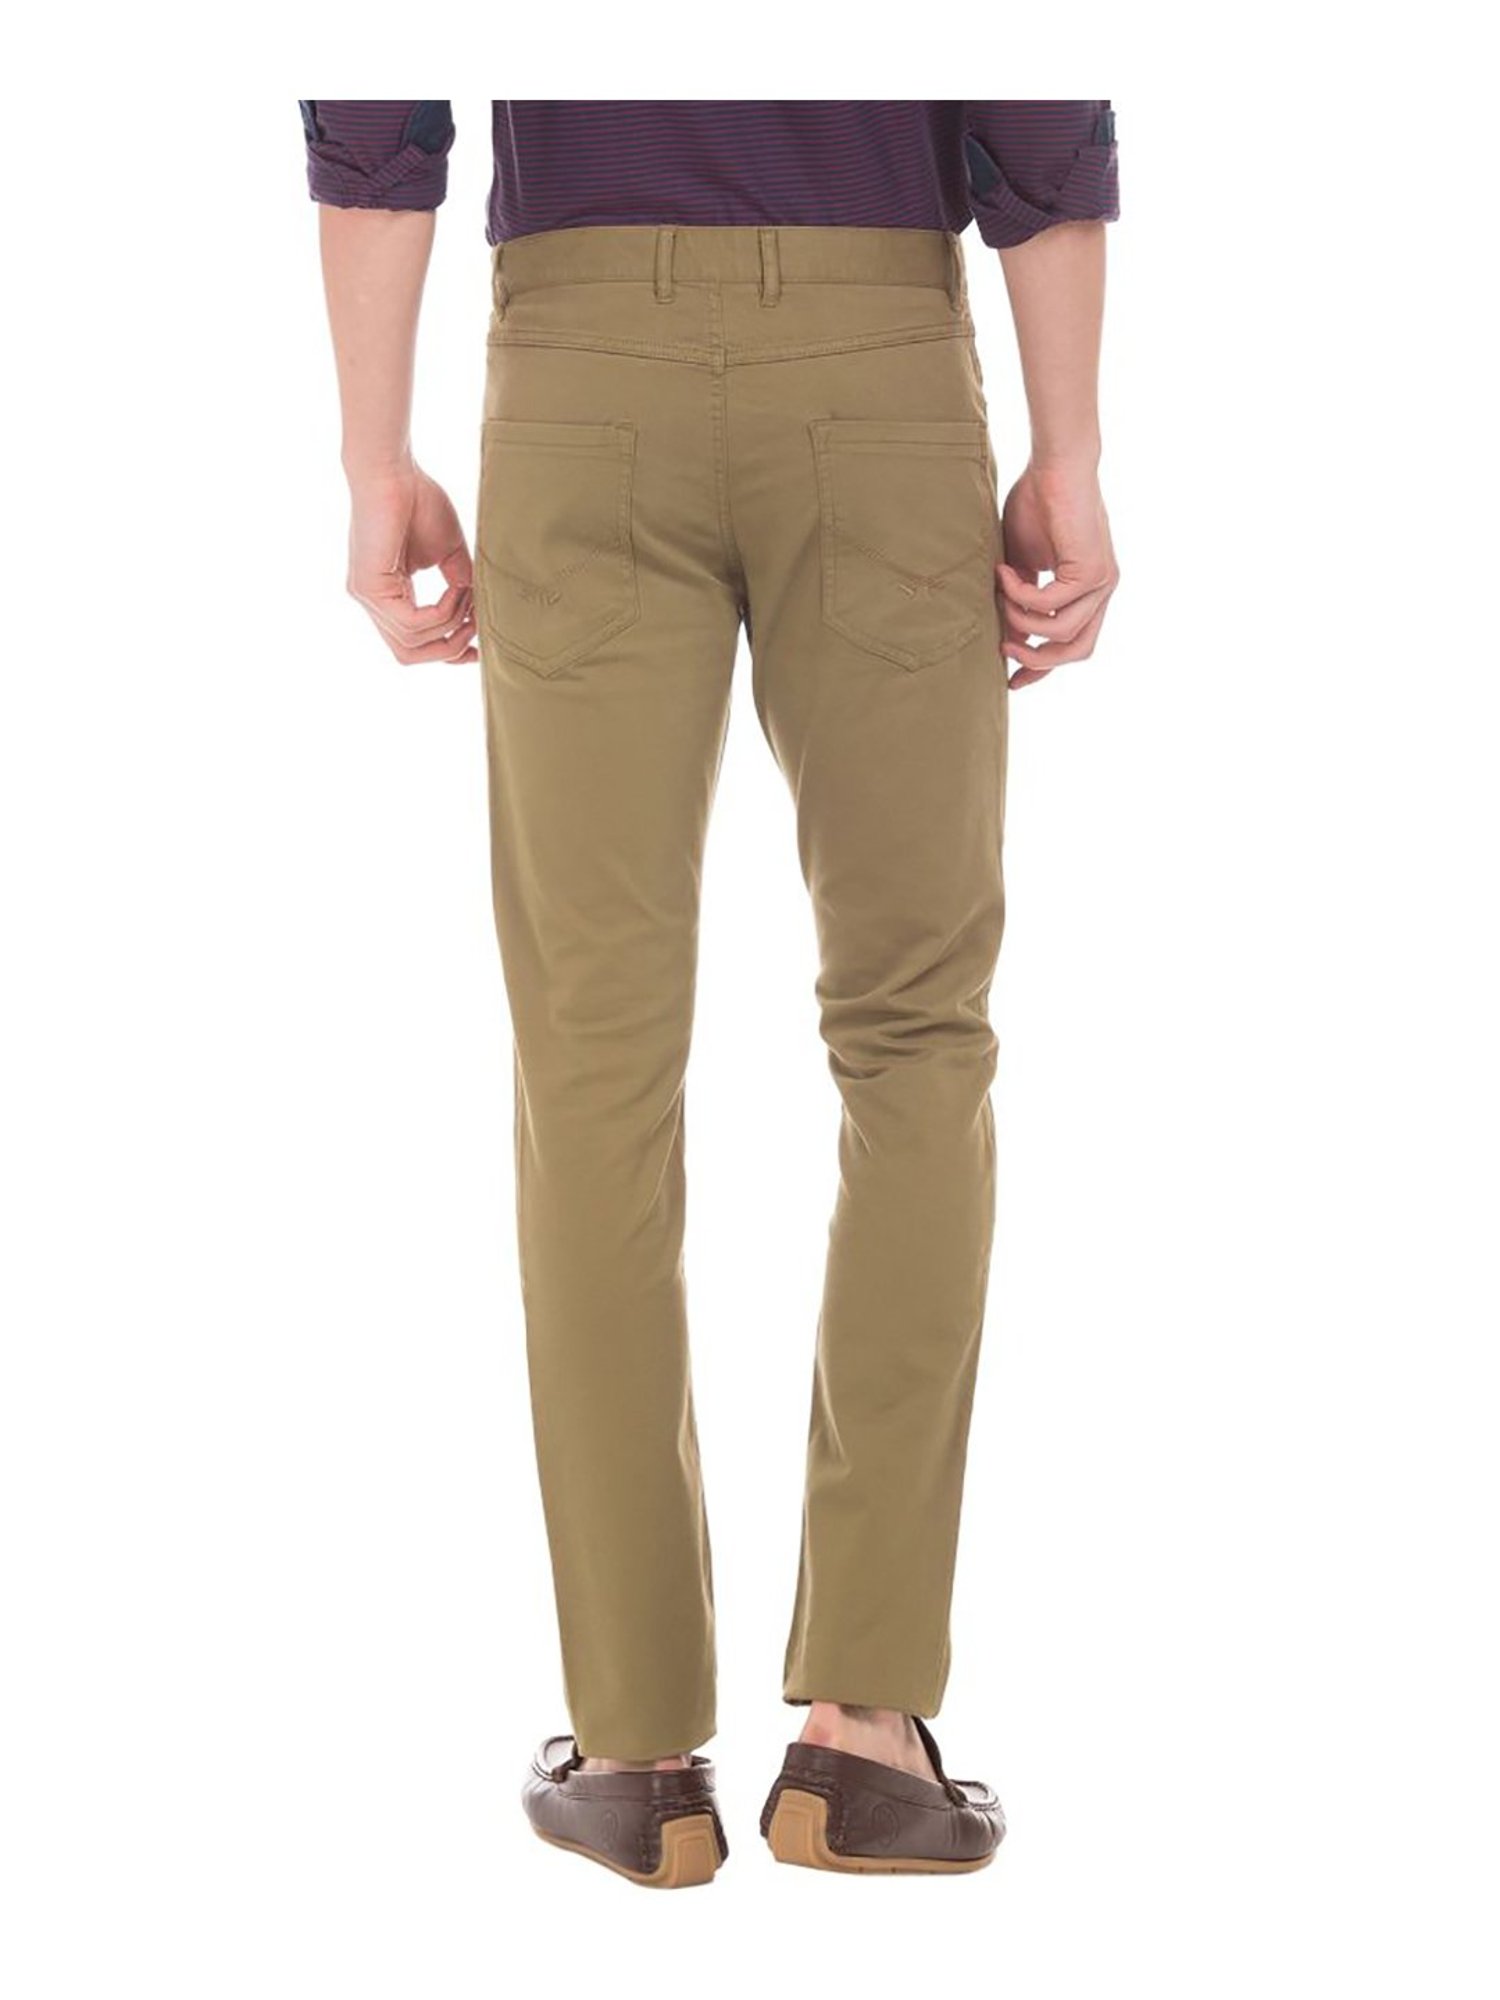 Buy Stone Trousers  Pants for Men by Buda Jeans Co Online  Ajiocom